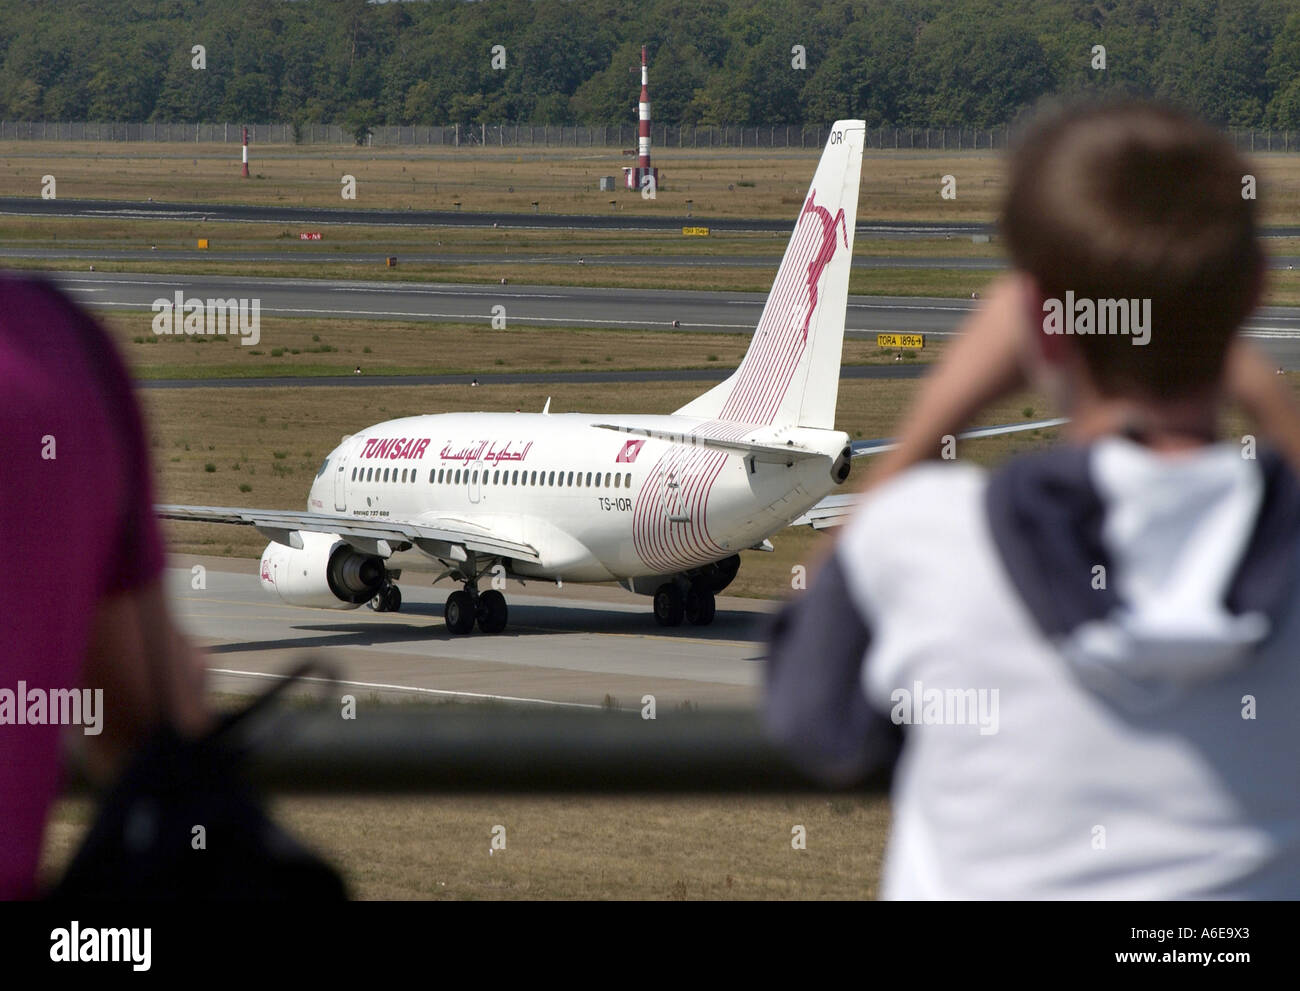 Plane spotters watching a TunisAir airplane at Tegel airport, Berlin Stock Photo